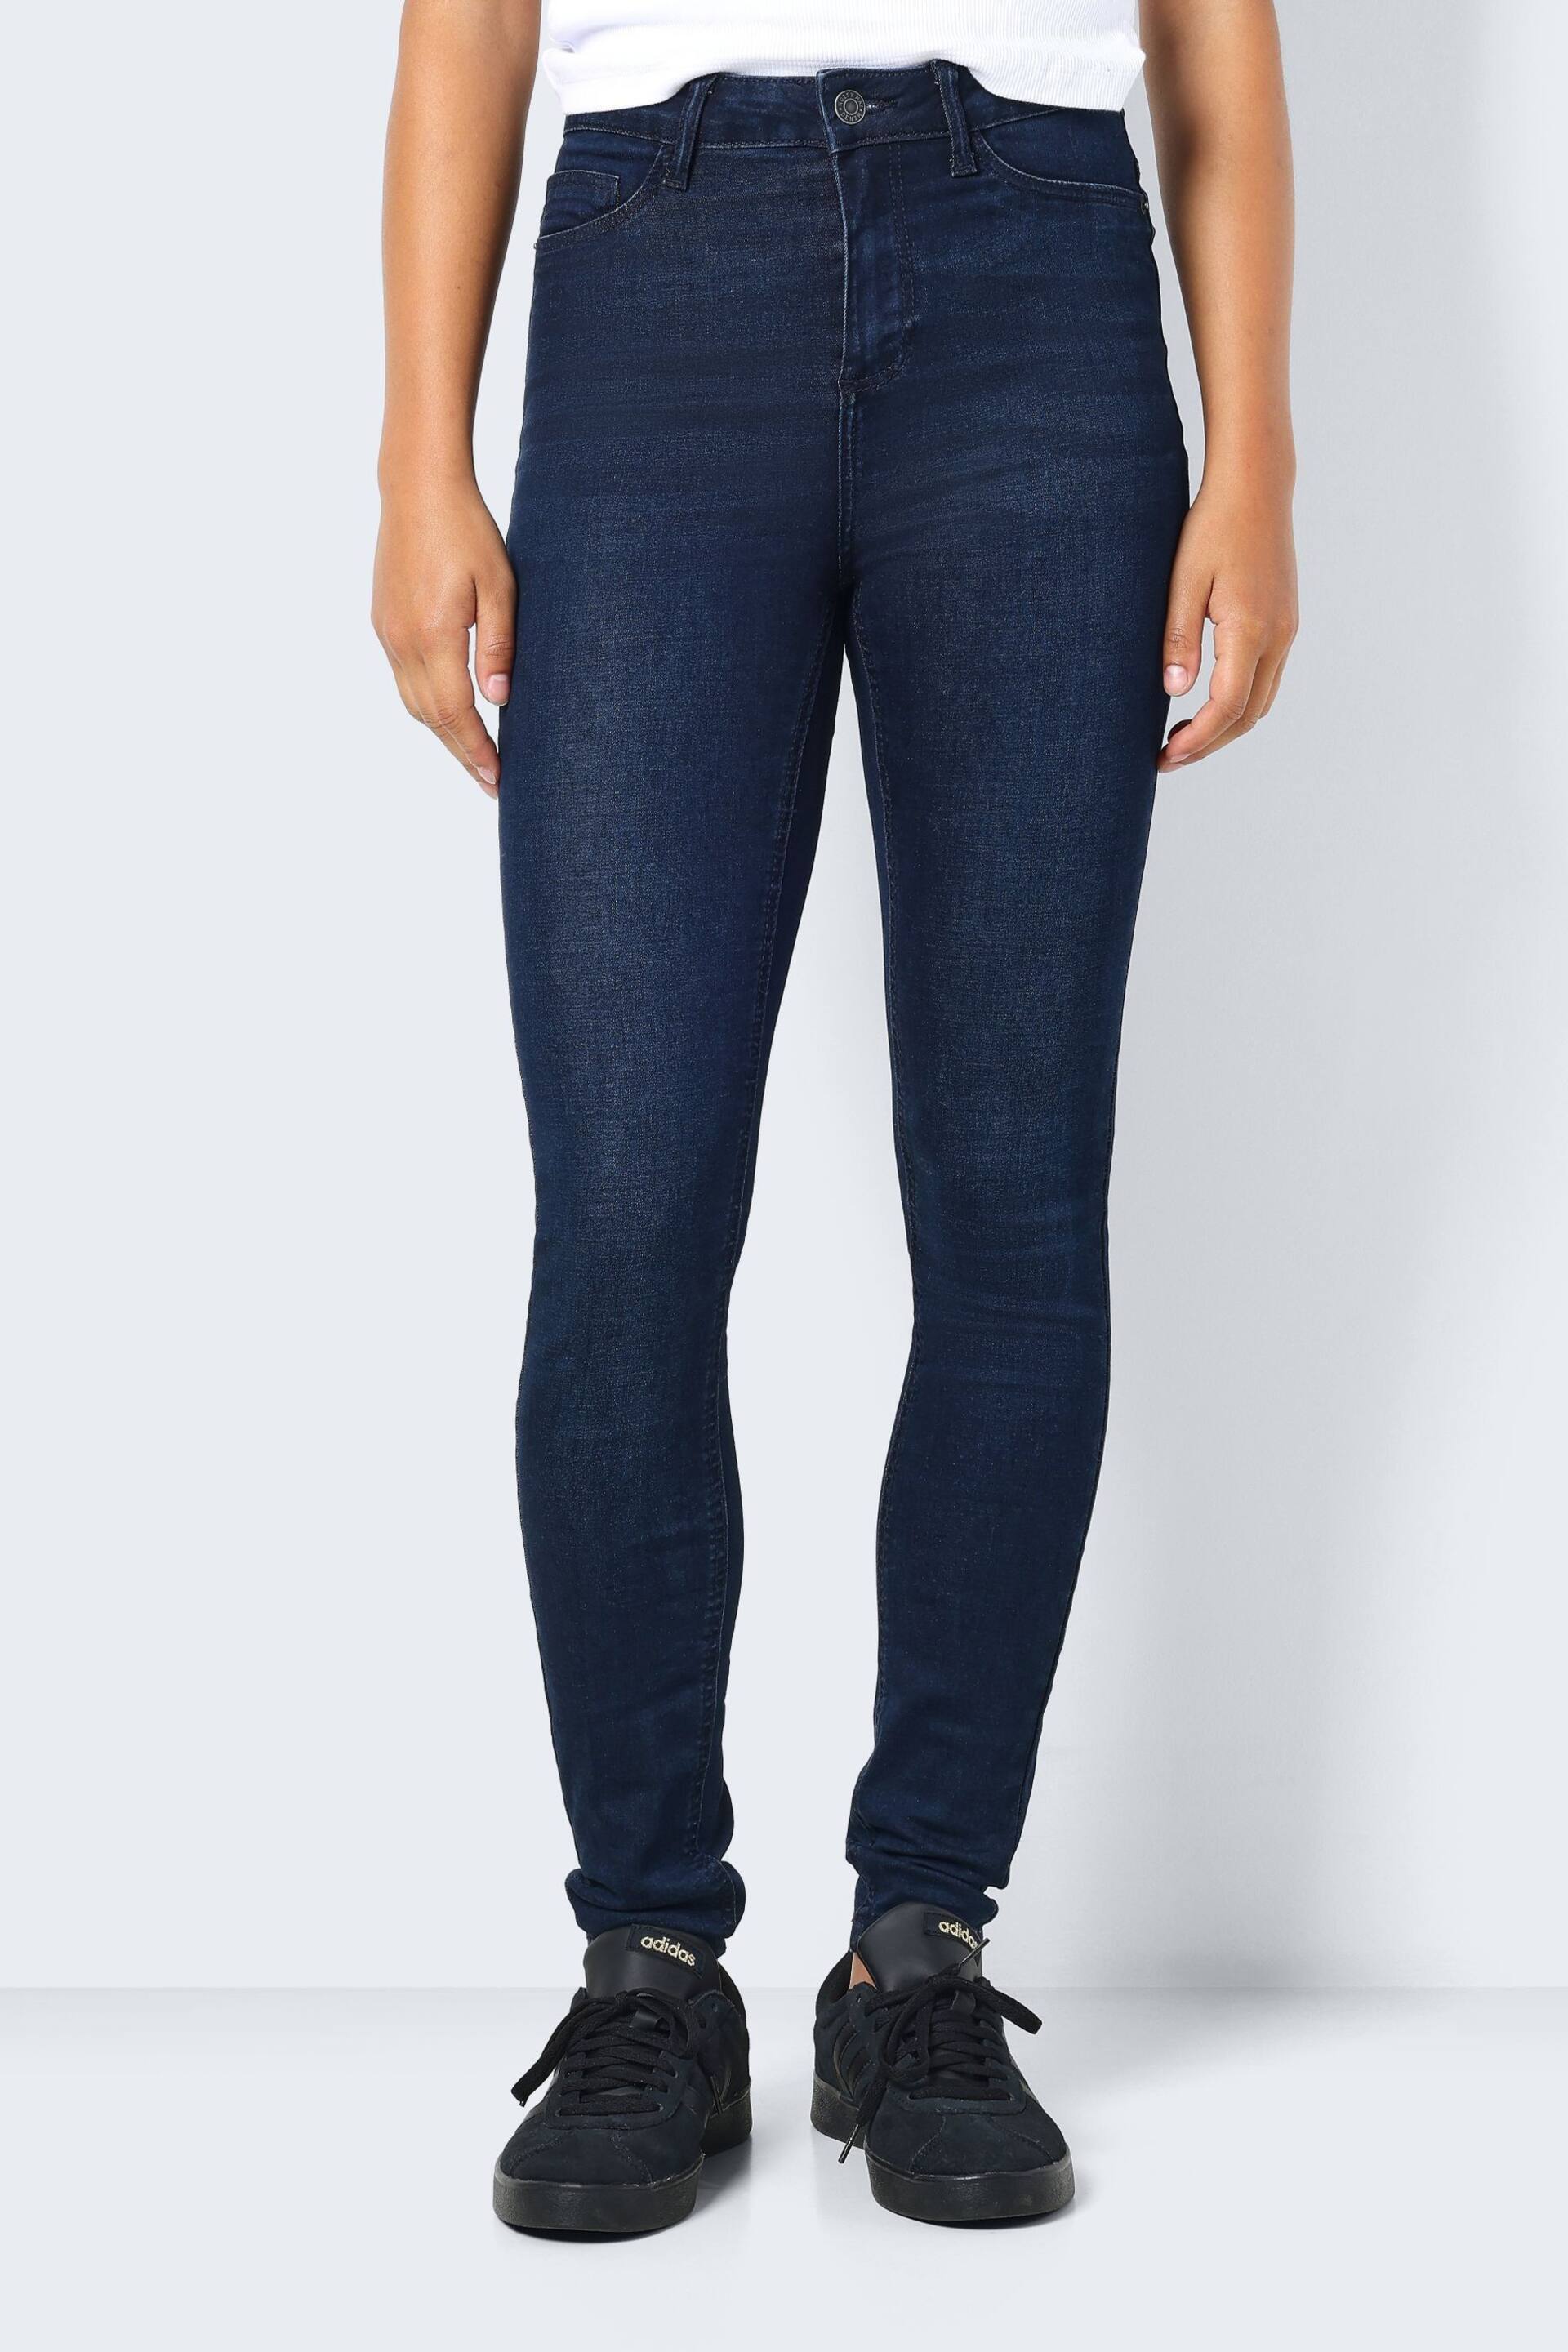 NOISY MAY Blue High Waisted Skinny Jeans - Image 1 of 5